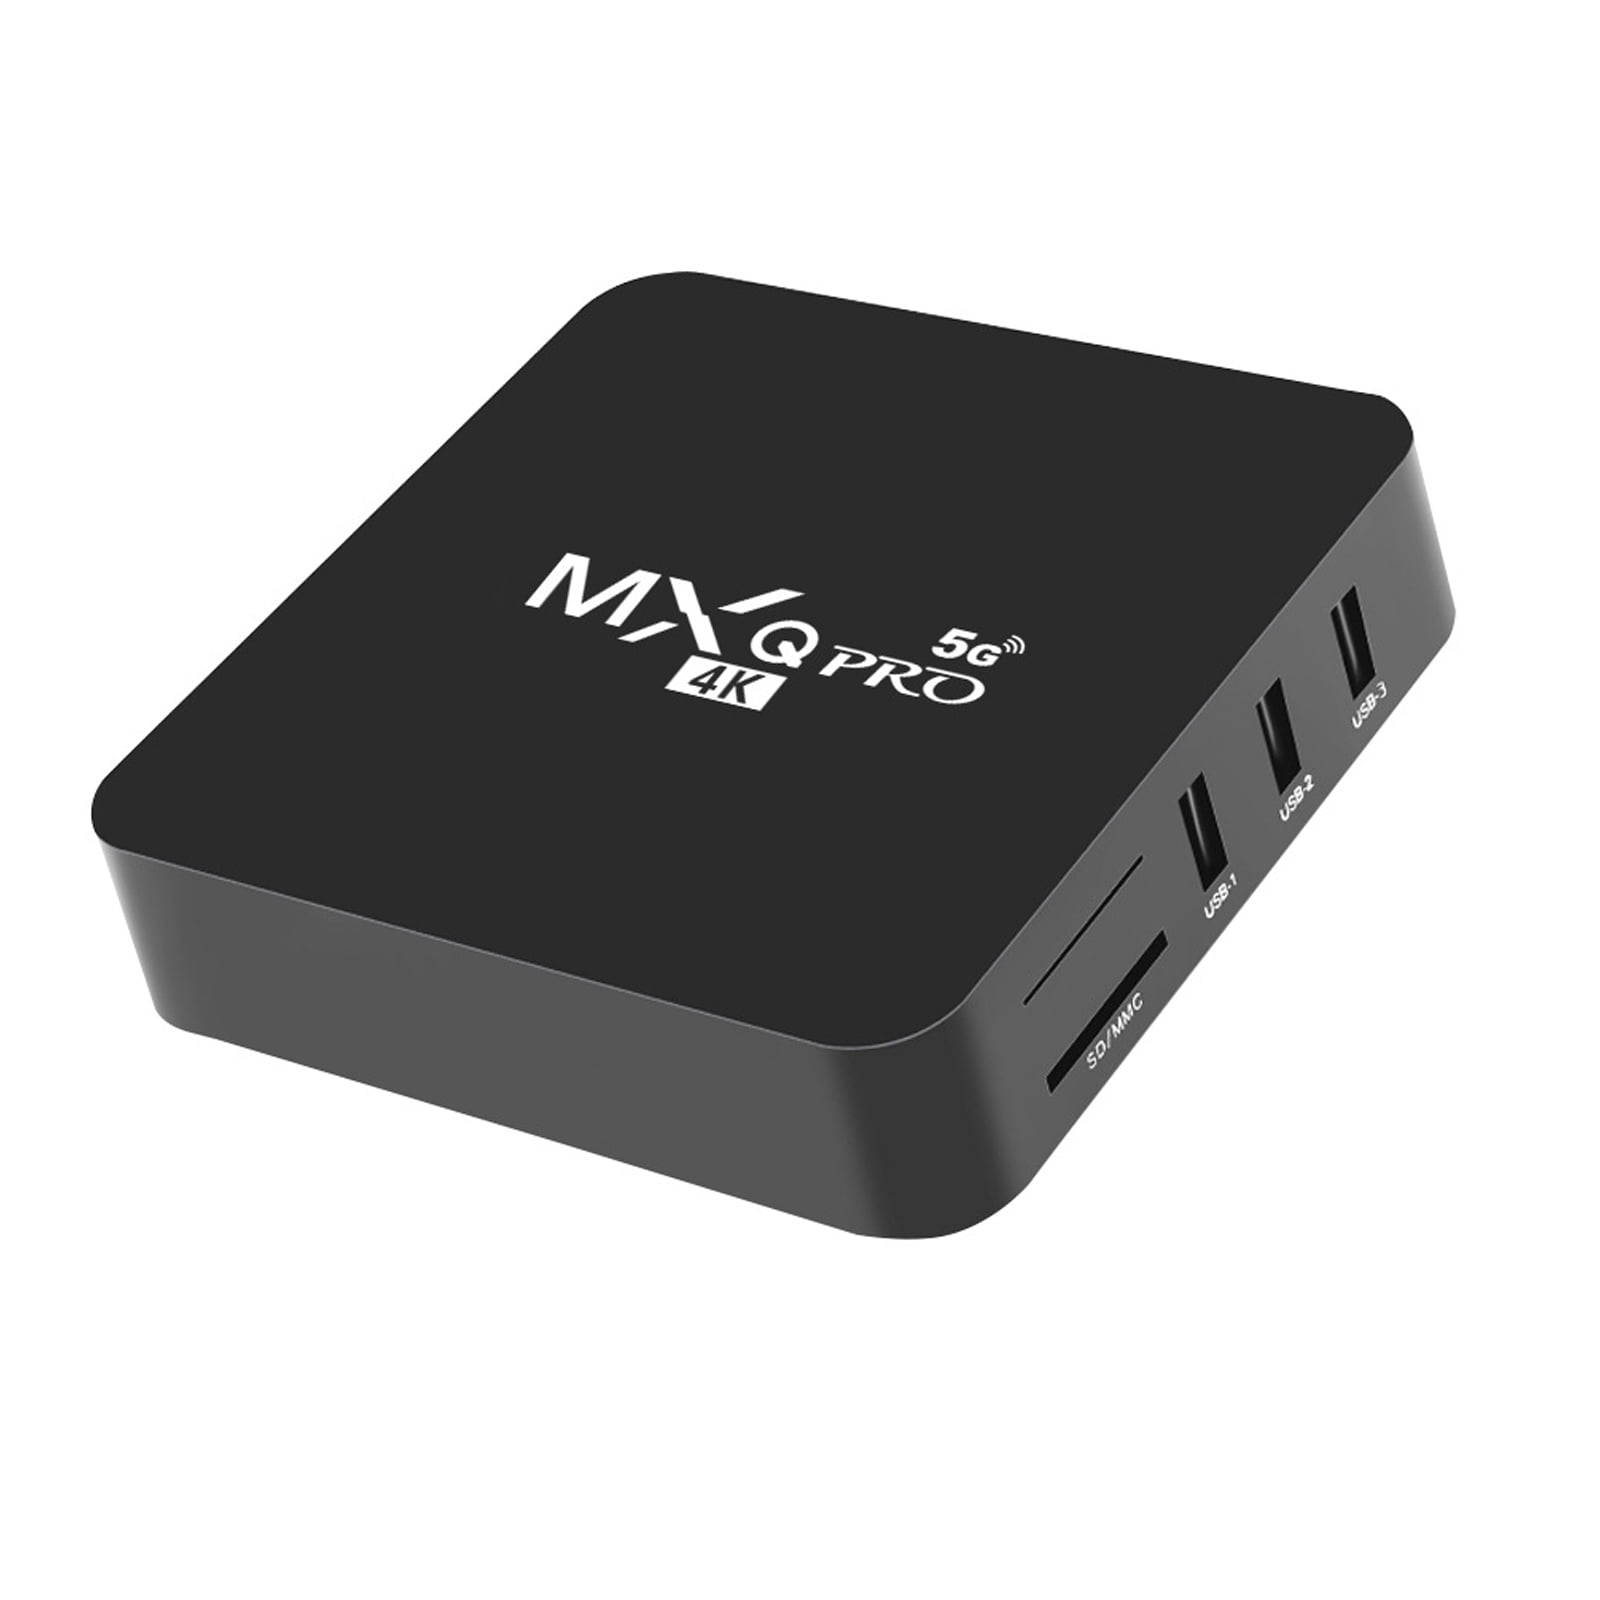 MXQ Pro 5G Android 13.1 TV Box Ram 1GB ROM 8GB Android Smart Box H.265 HD  3D Dual Band 2.4G/5.8G WiFi Quad Core Home Media Player